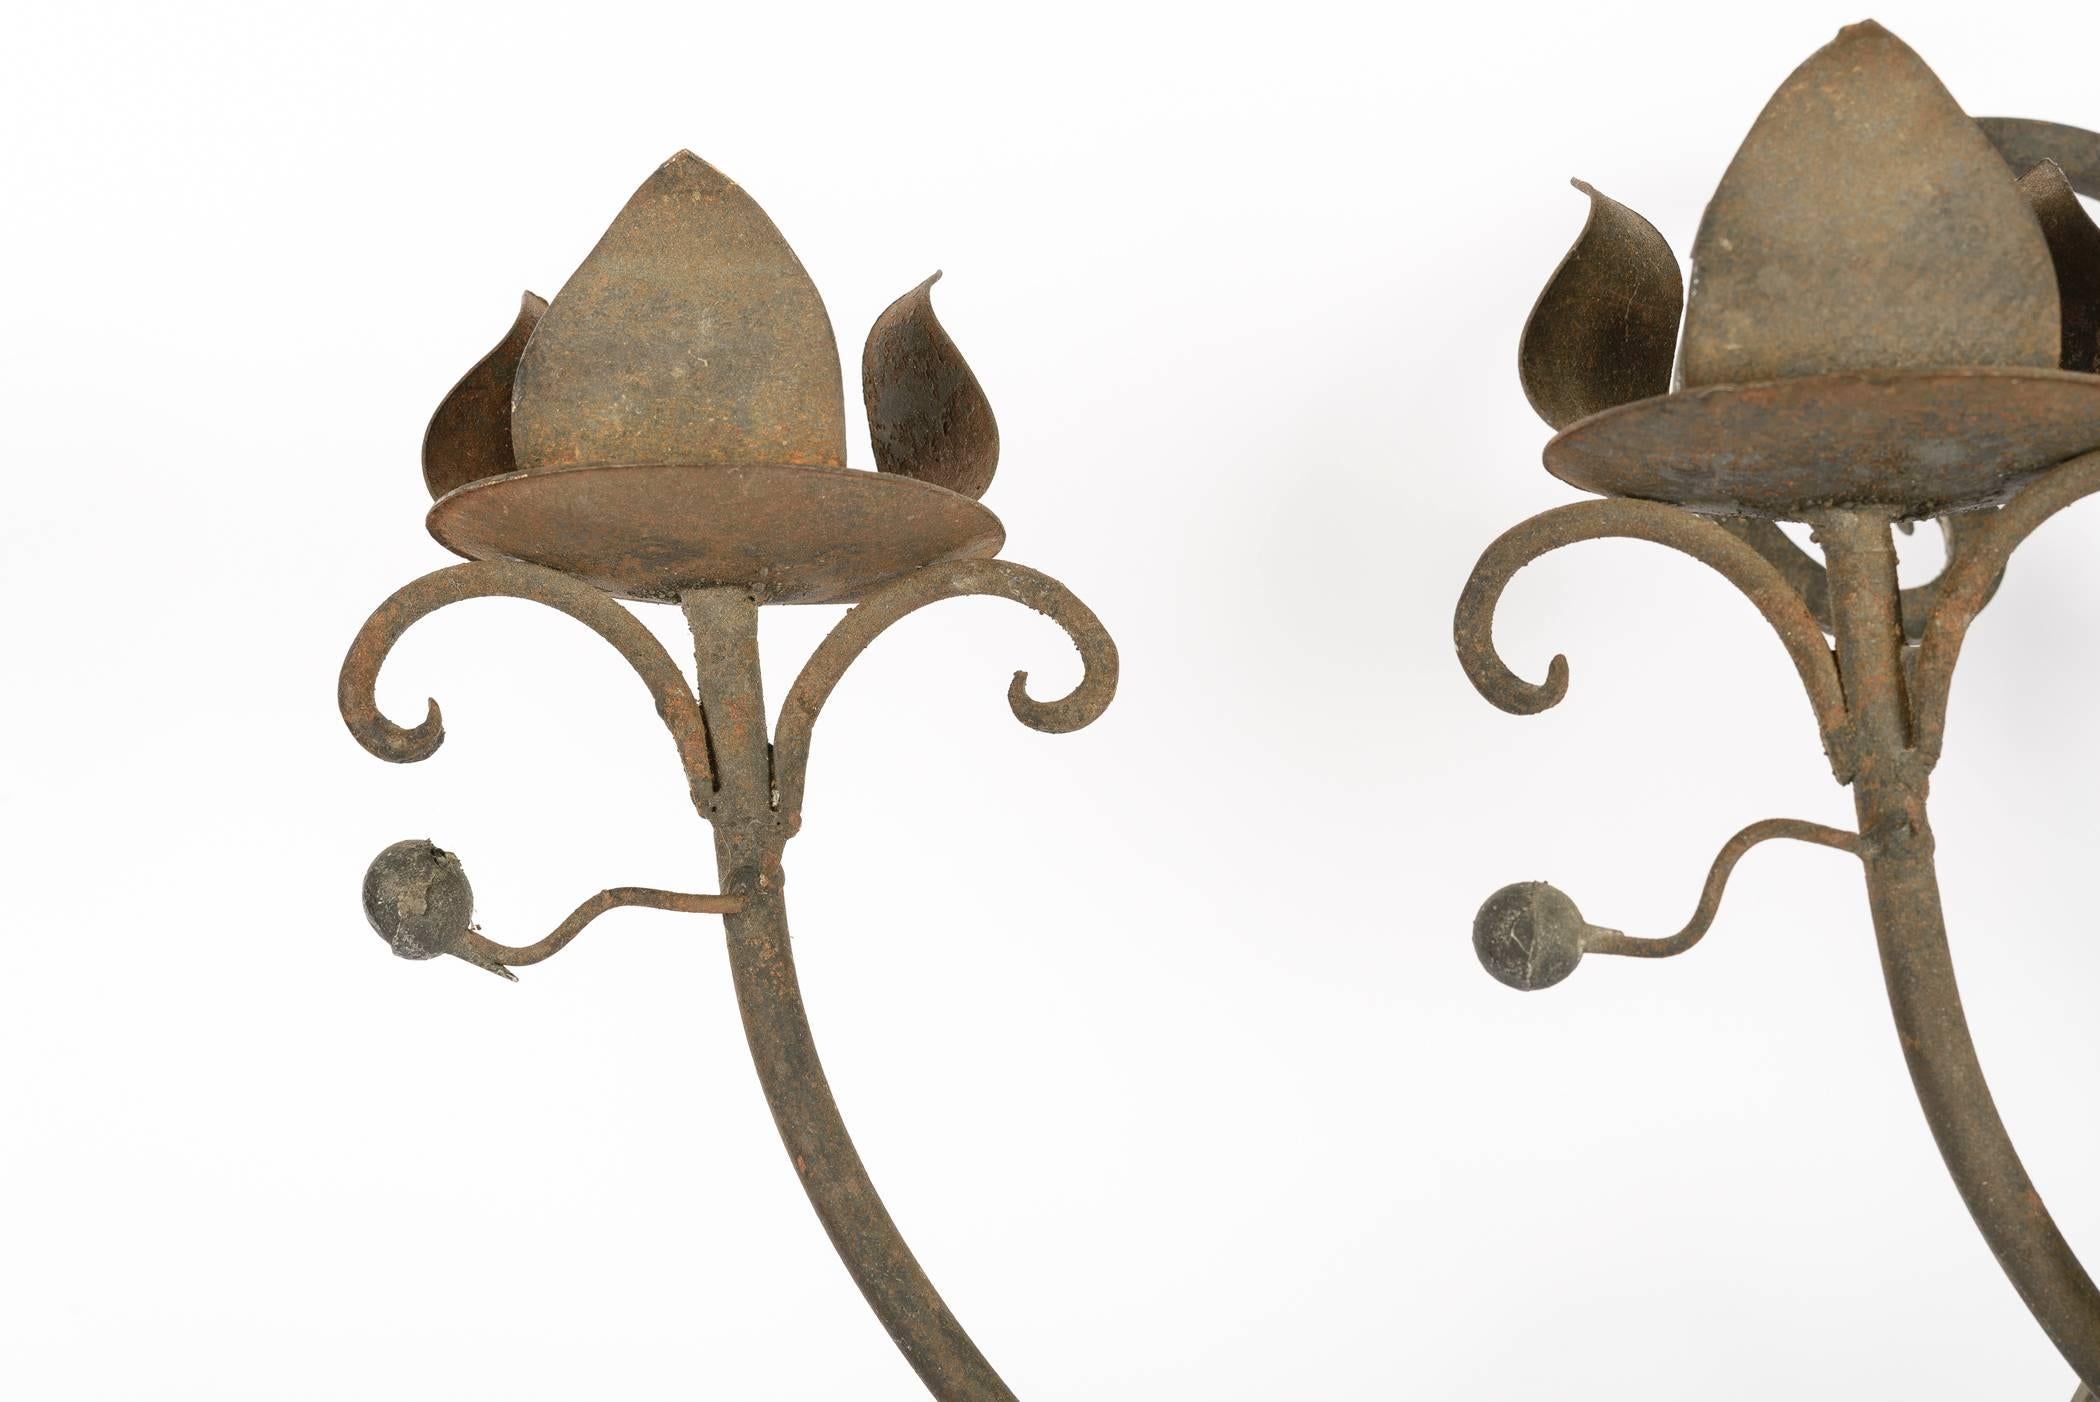 This large sconce has seven candles or light cups. The upward arms of the sconce have berry and leaf detail. The candle cups are flower petals. It is drilled to be easily electrified, but lovely, too, for wax candles.